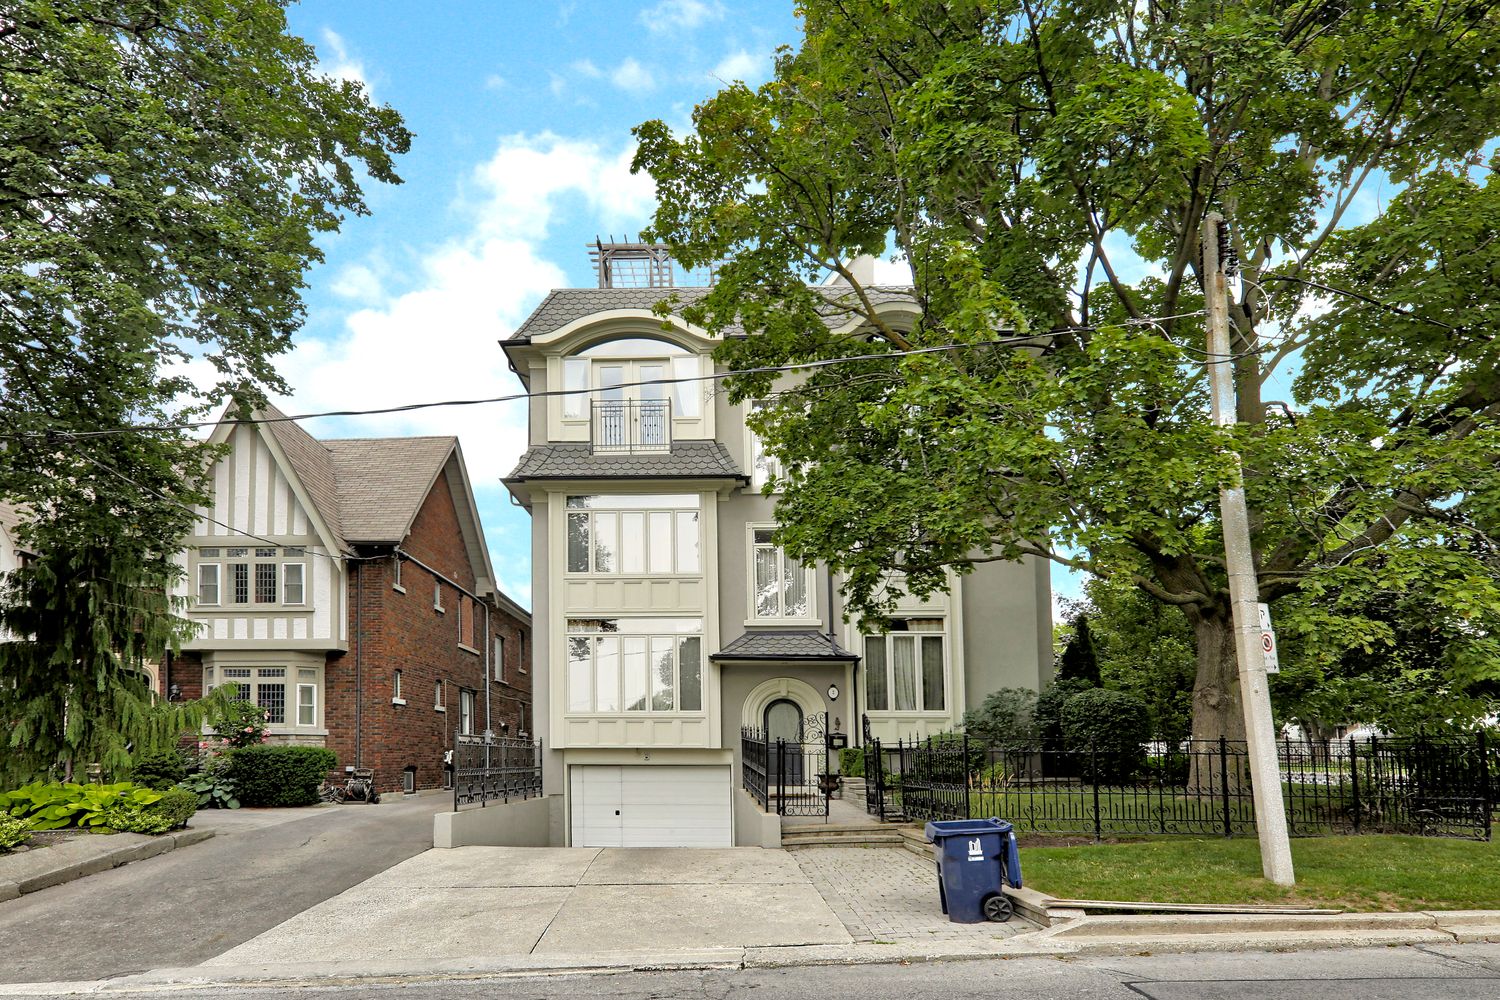 1 Castleview Avenue. Castle View Terrace is located in  Midtown, Toronto - image #1 of 5